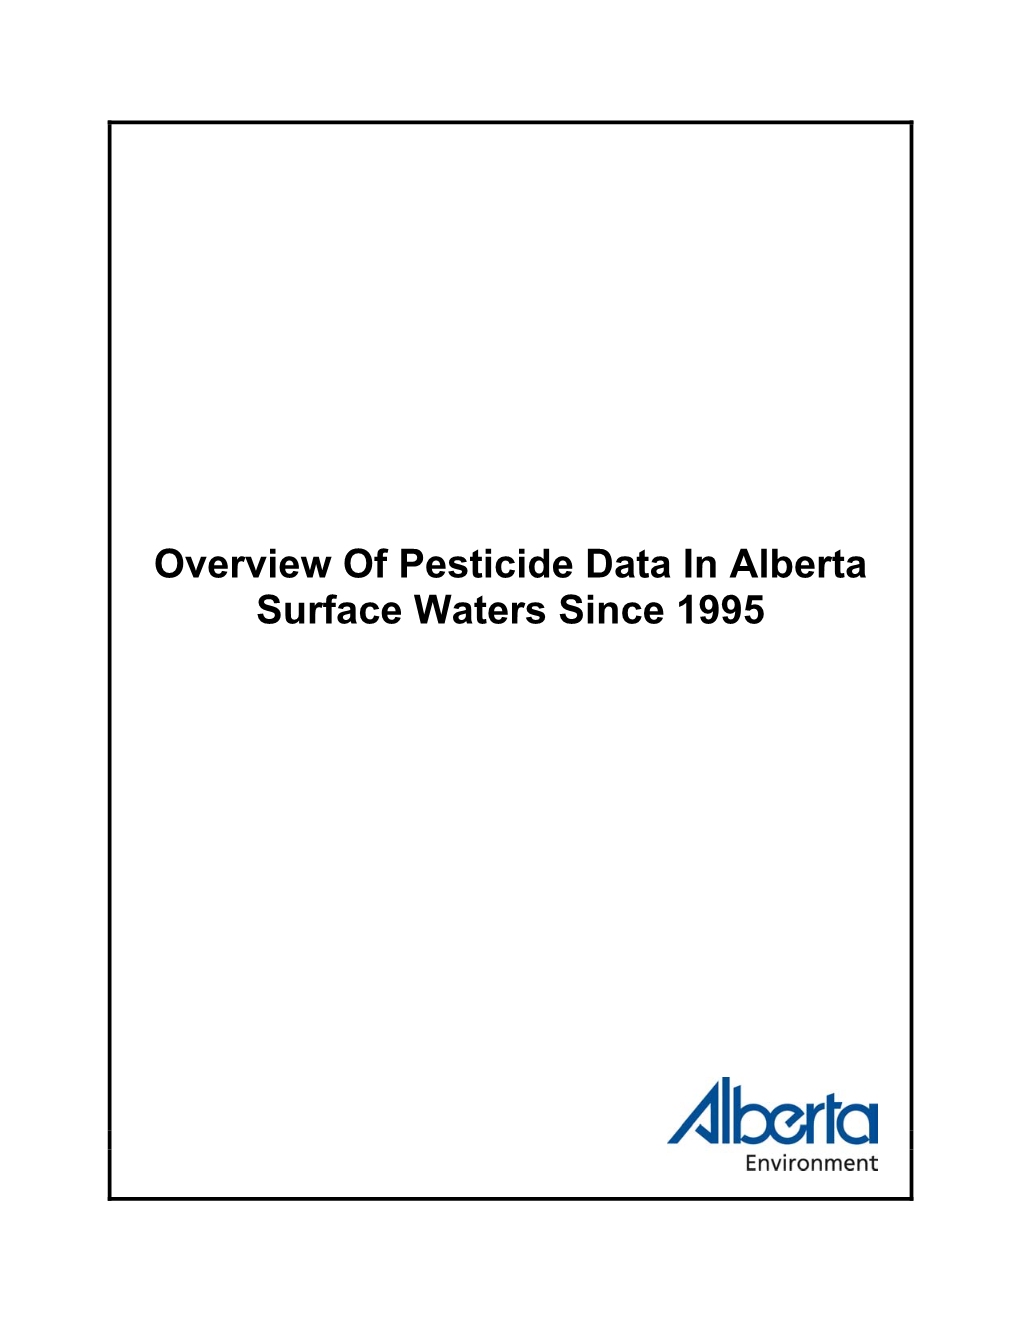 Overview of Pesticide Data in Alberta Surface Waters Since 1995